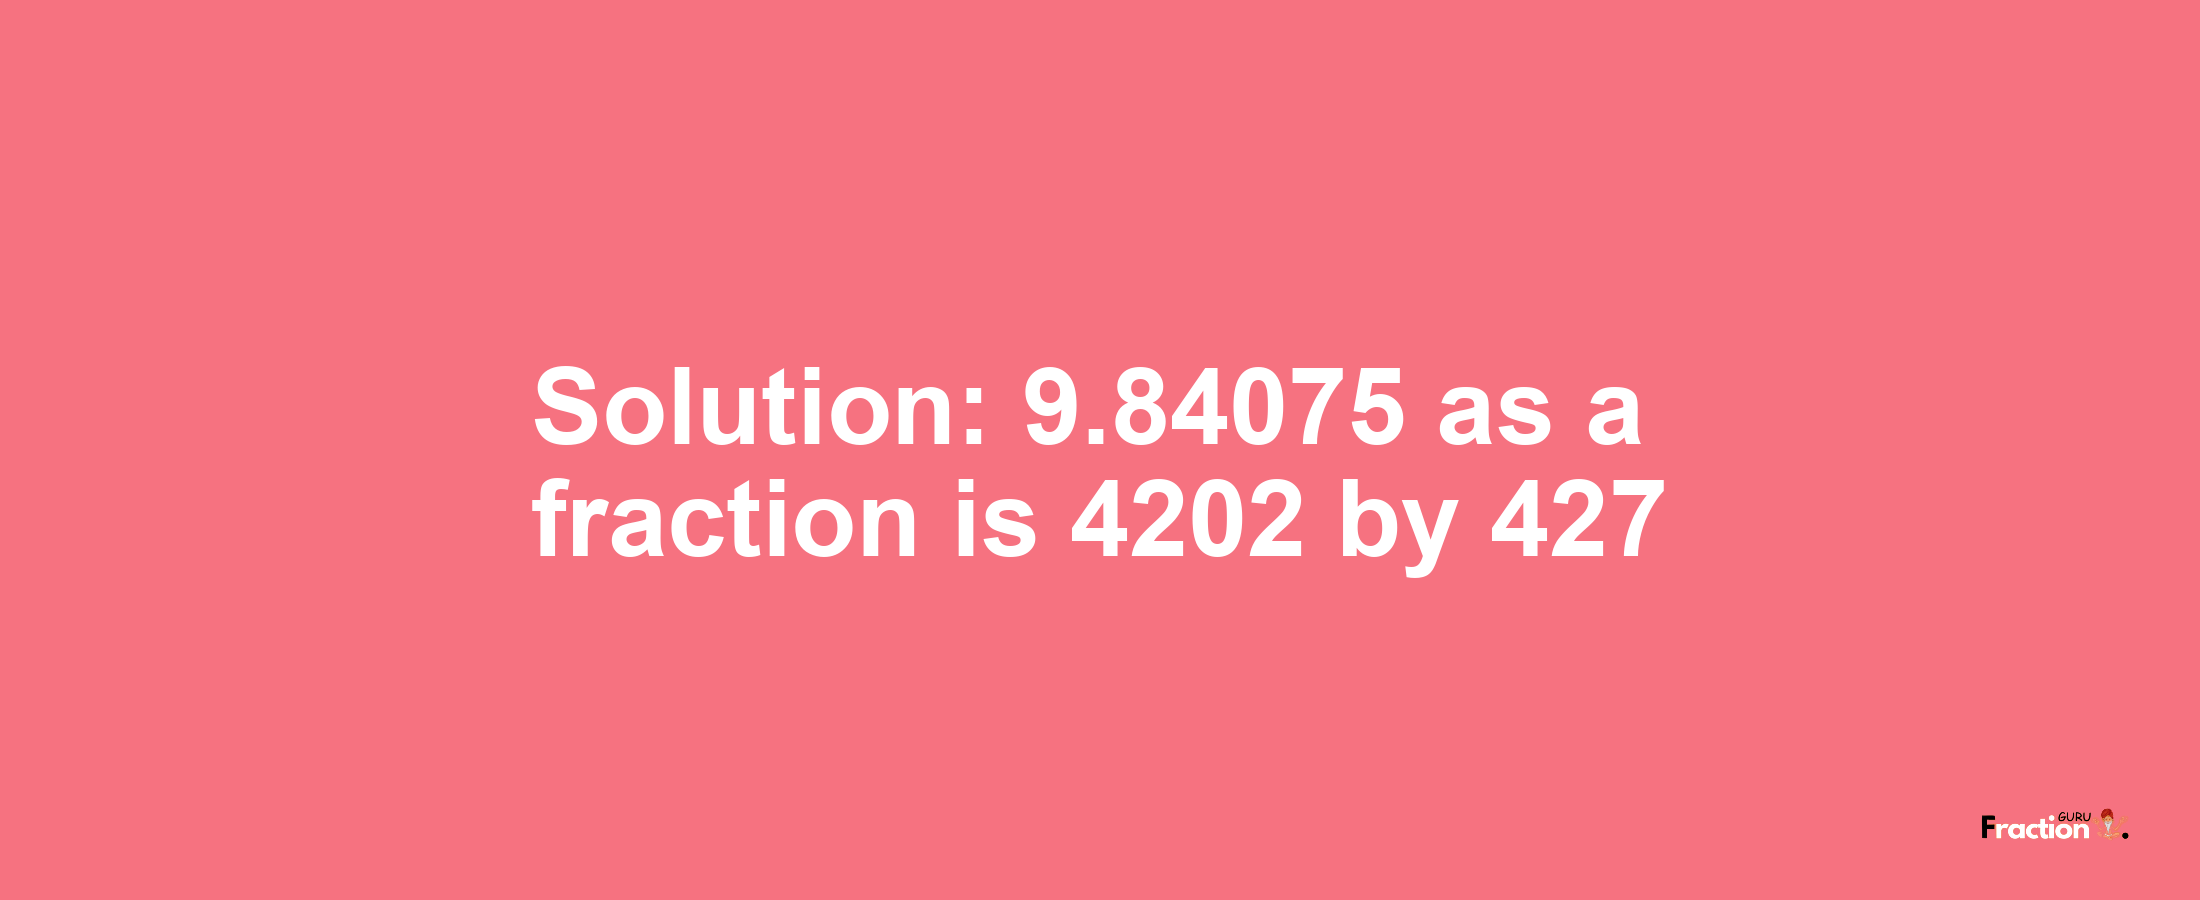 Solution:9.84075 as a fraction is 4202/427